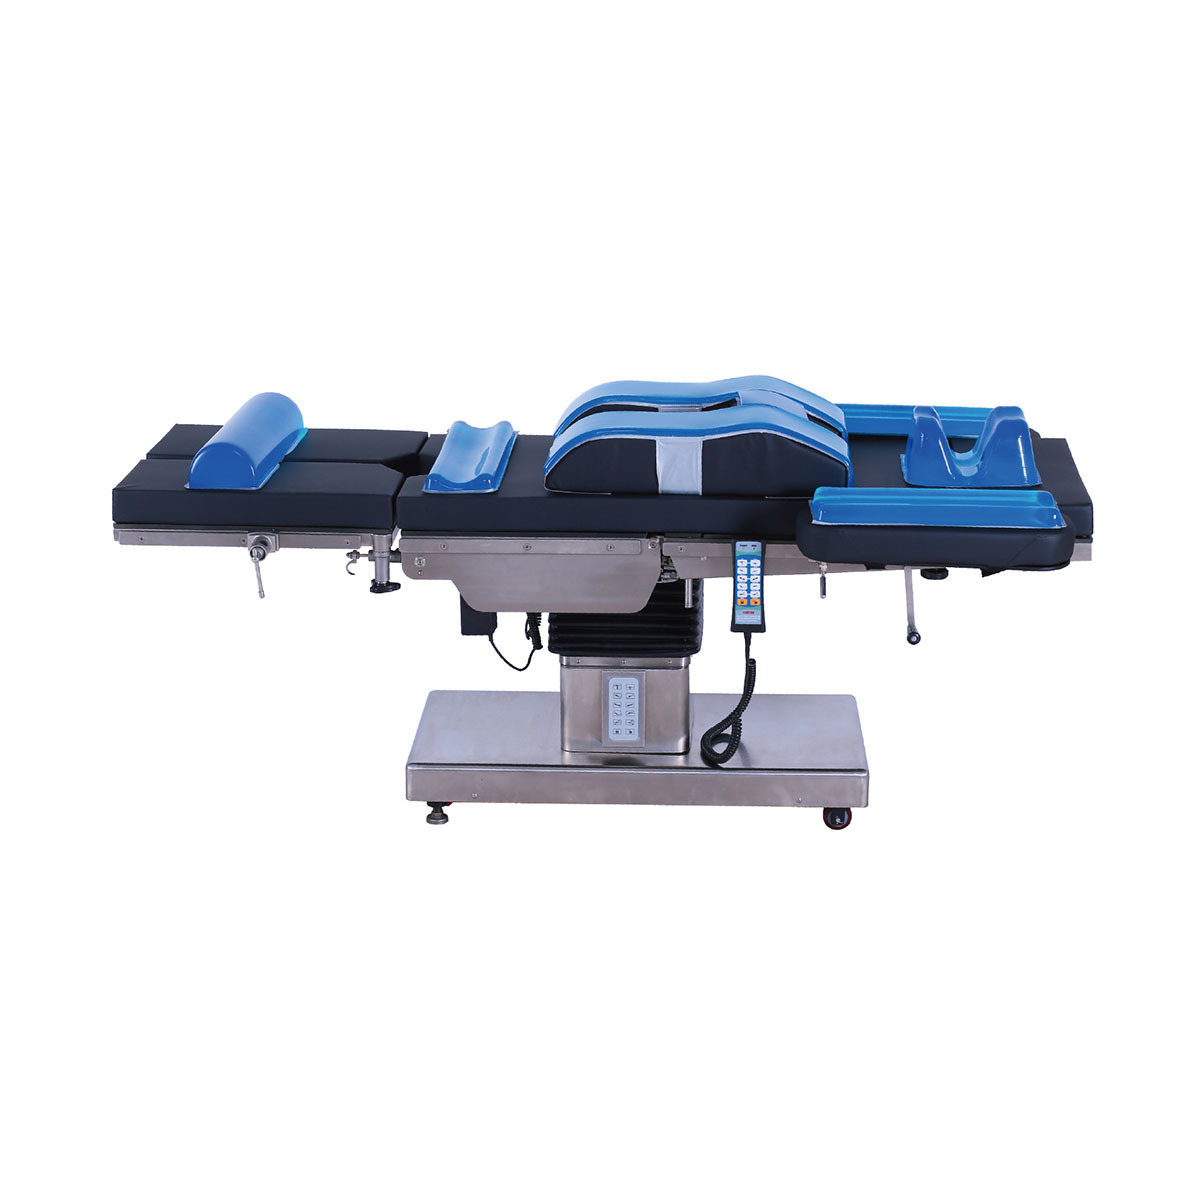 Surgical Positioning Pad